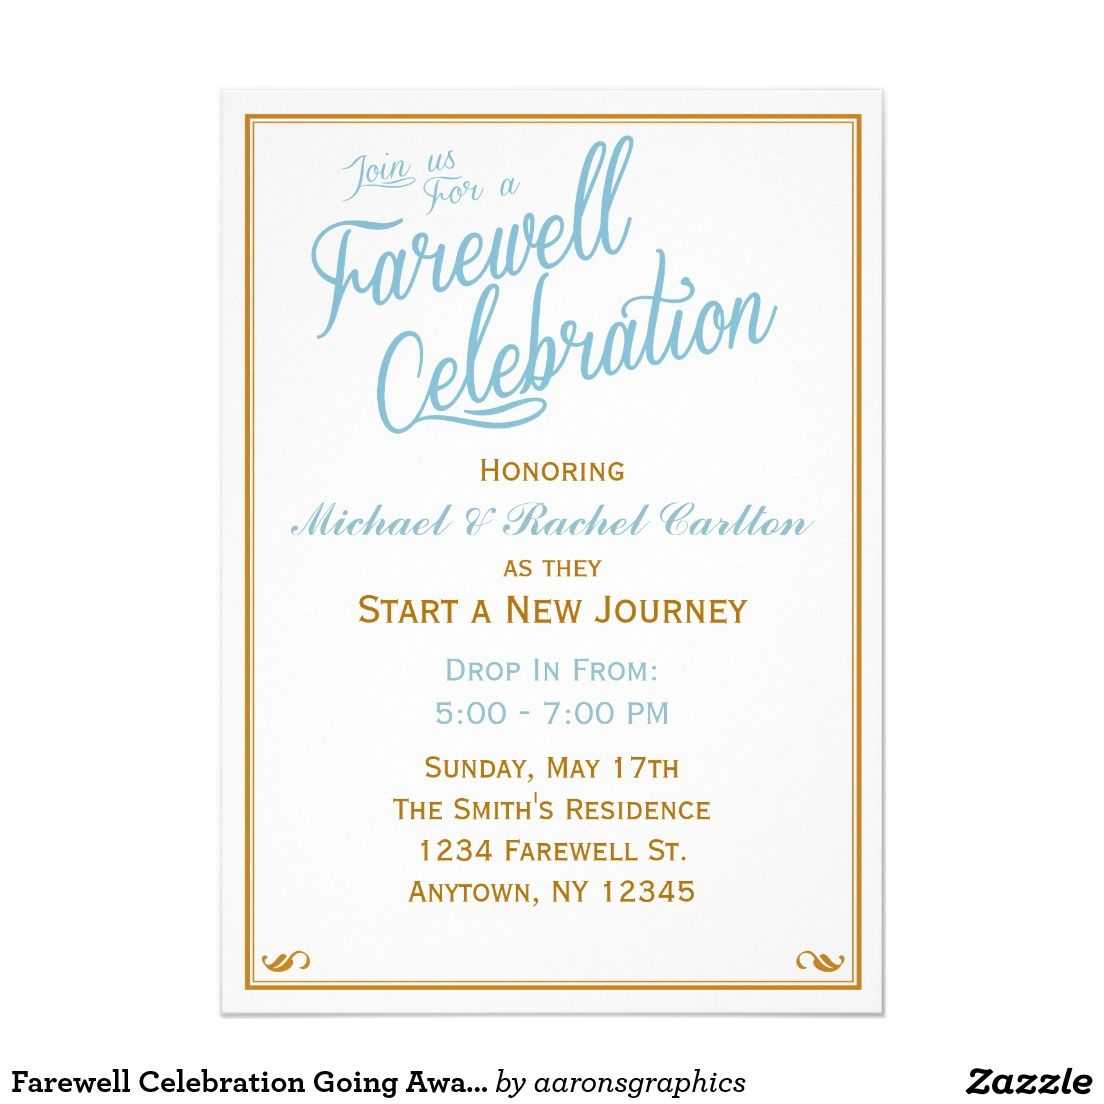 Farewell Celebration Going Away Invitation | Zazzle Intended For Farewell Invitation Card Template